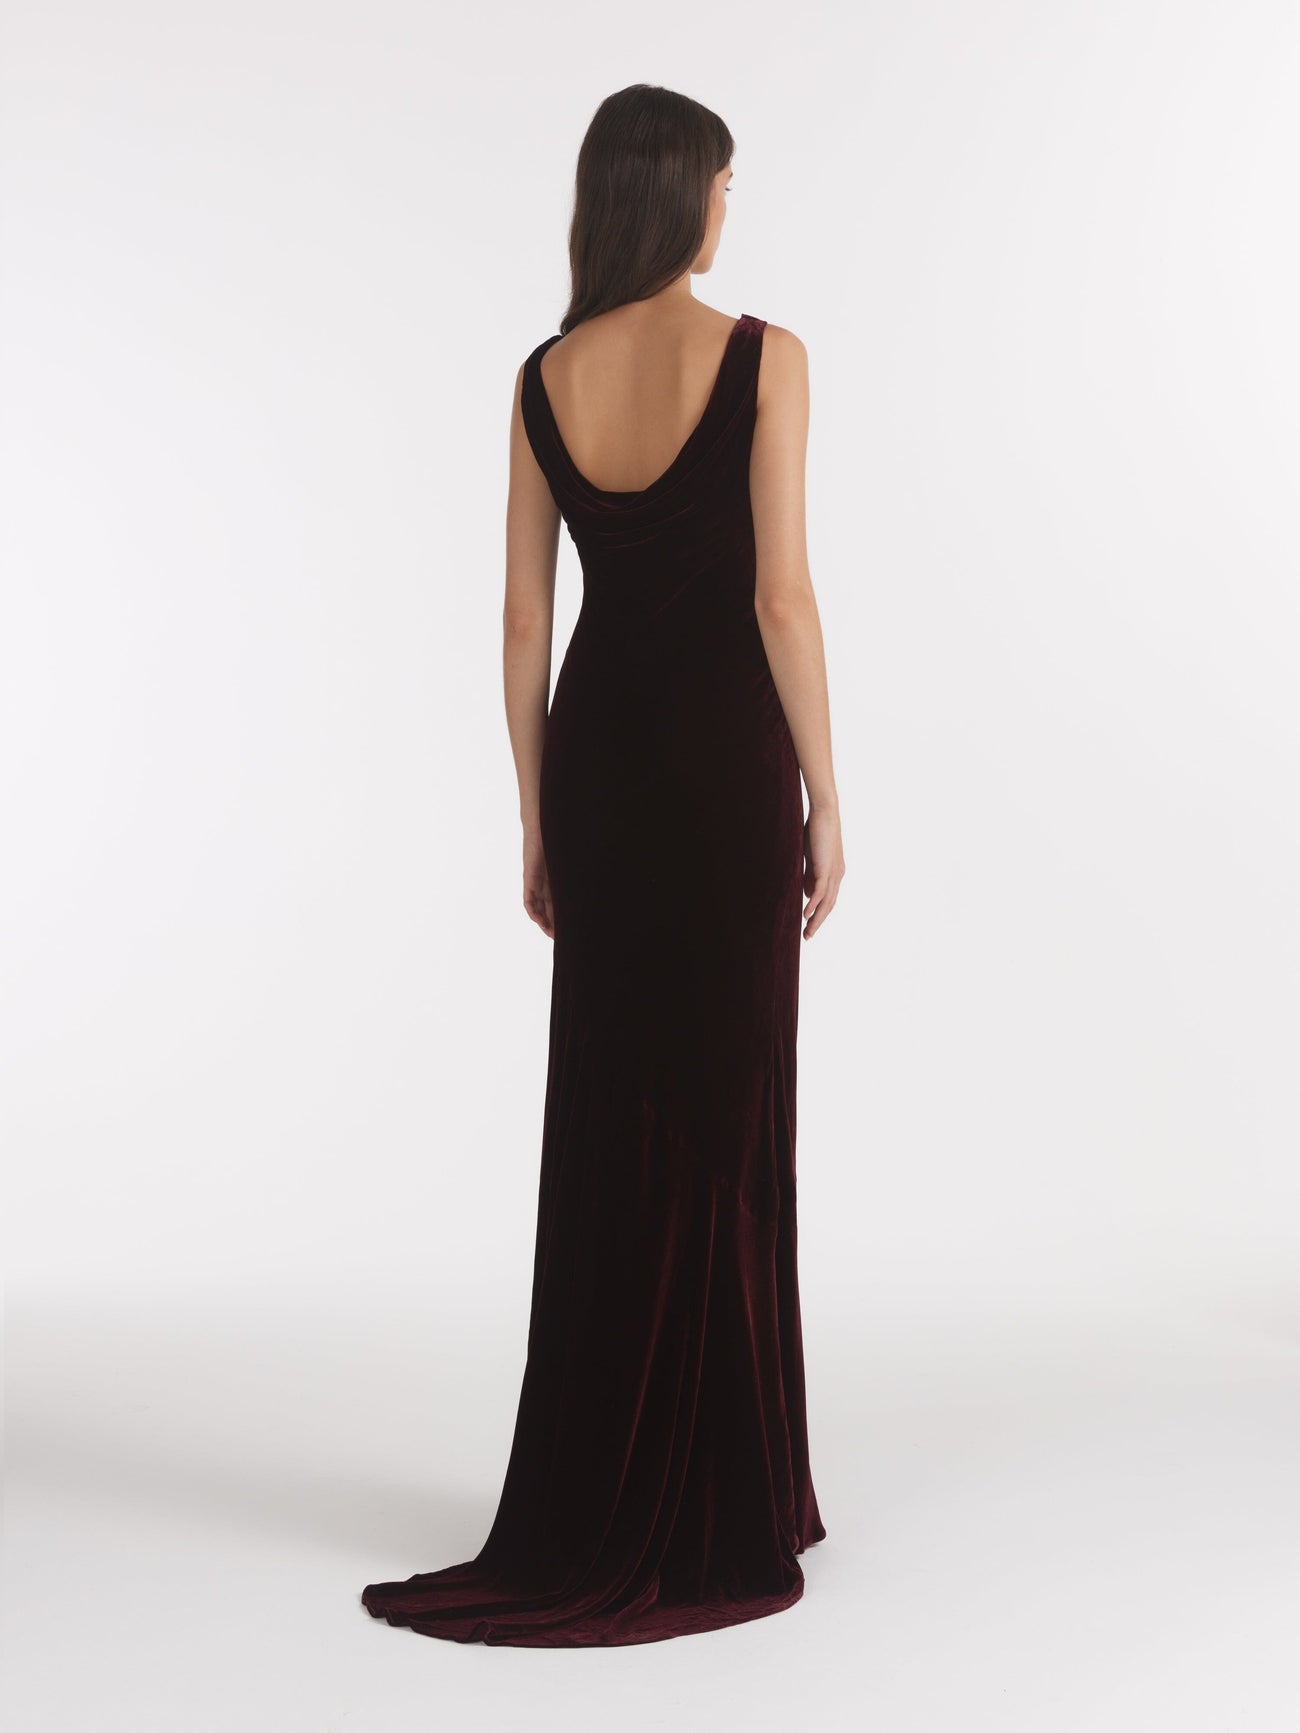 Load image into Gallery viewer, Asher Long Dress in Burgundy